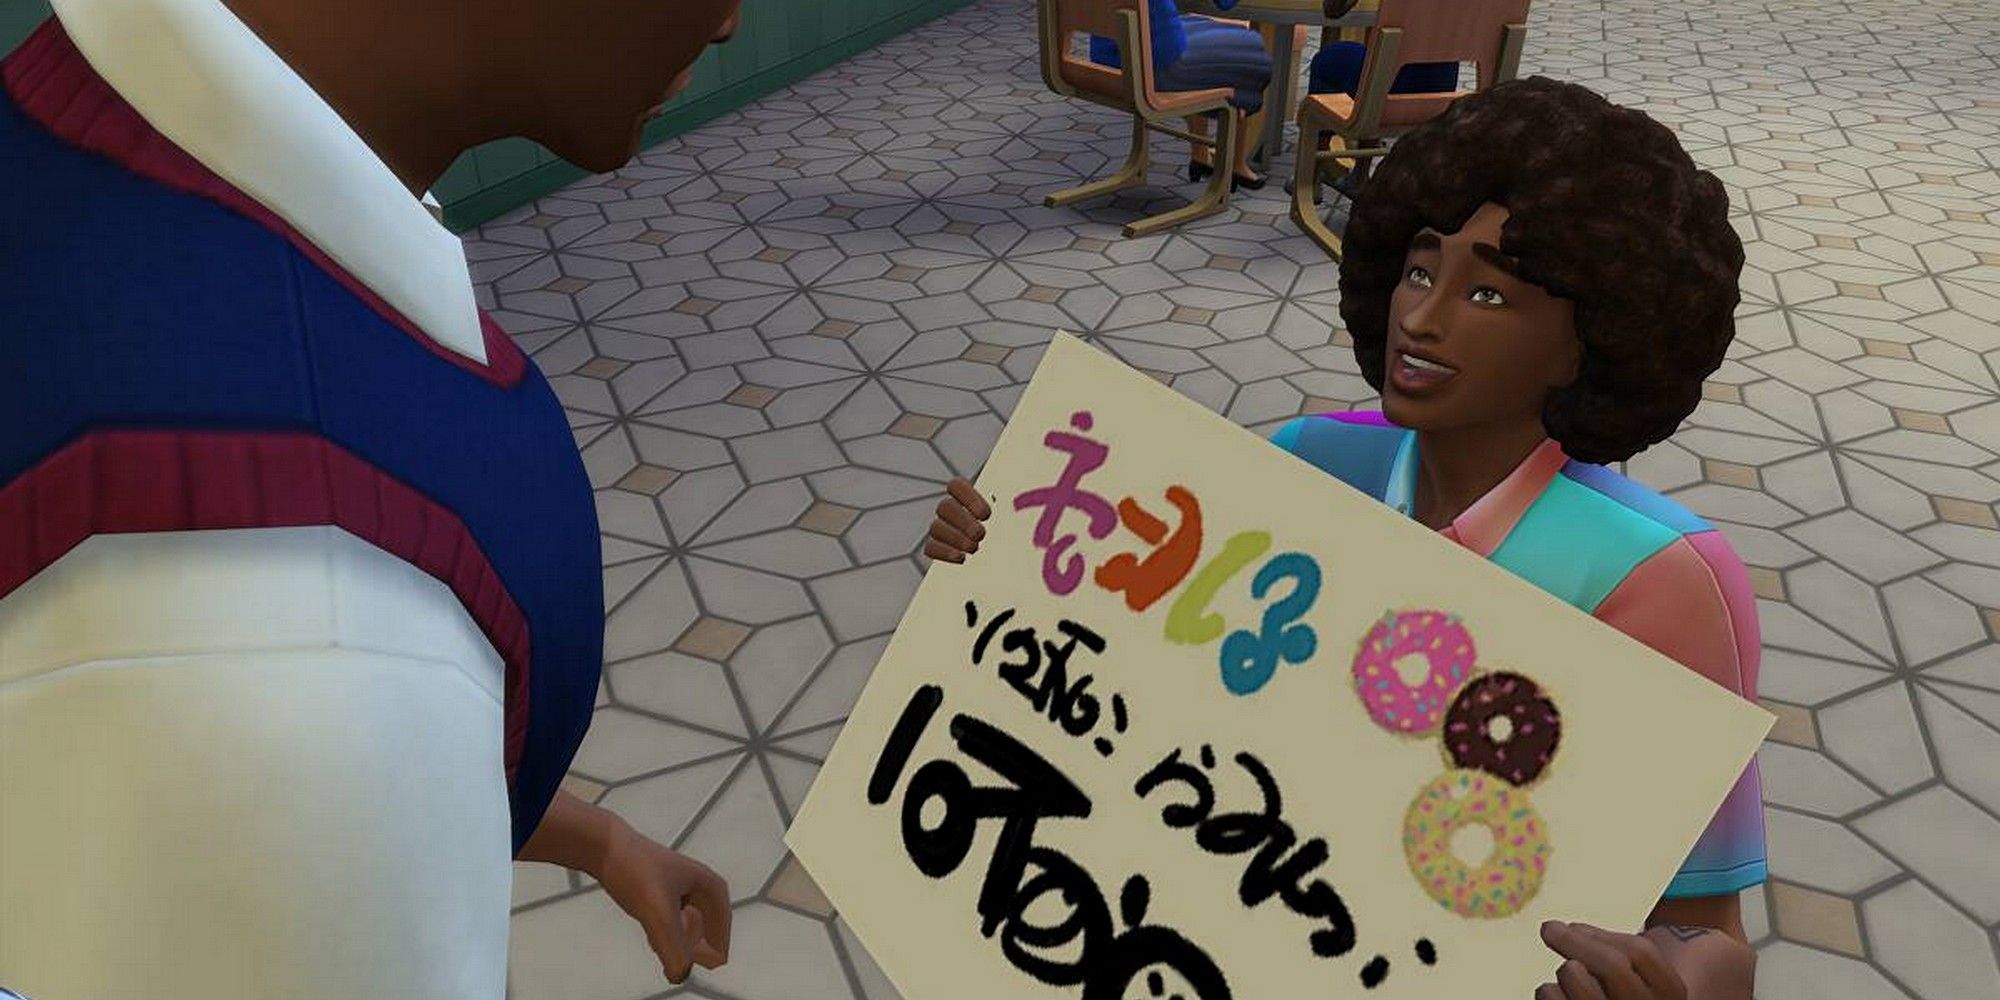 Sims 4 High School Years Prom Promposal Sign Proposal Event Proposing Painting